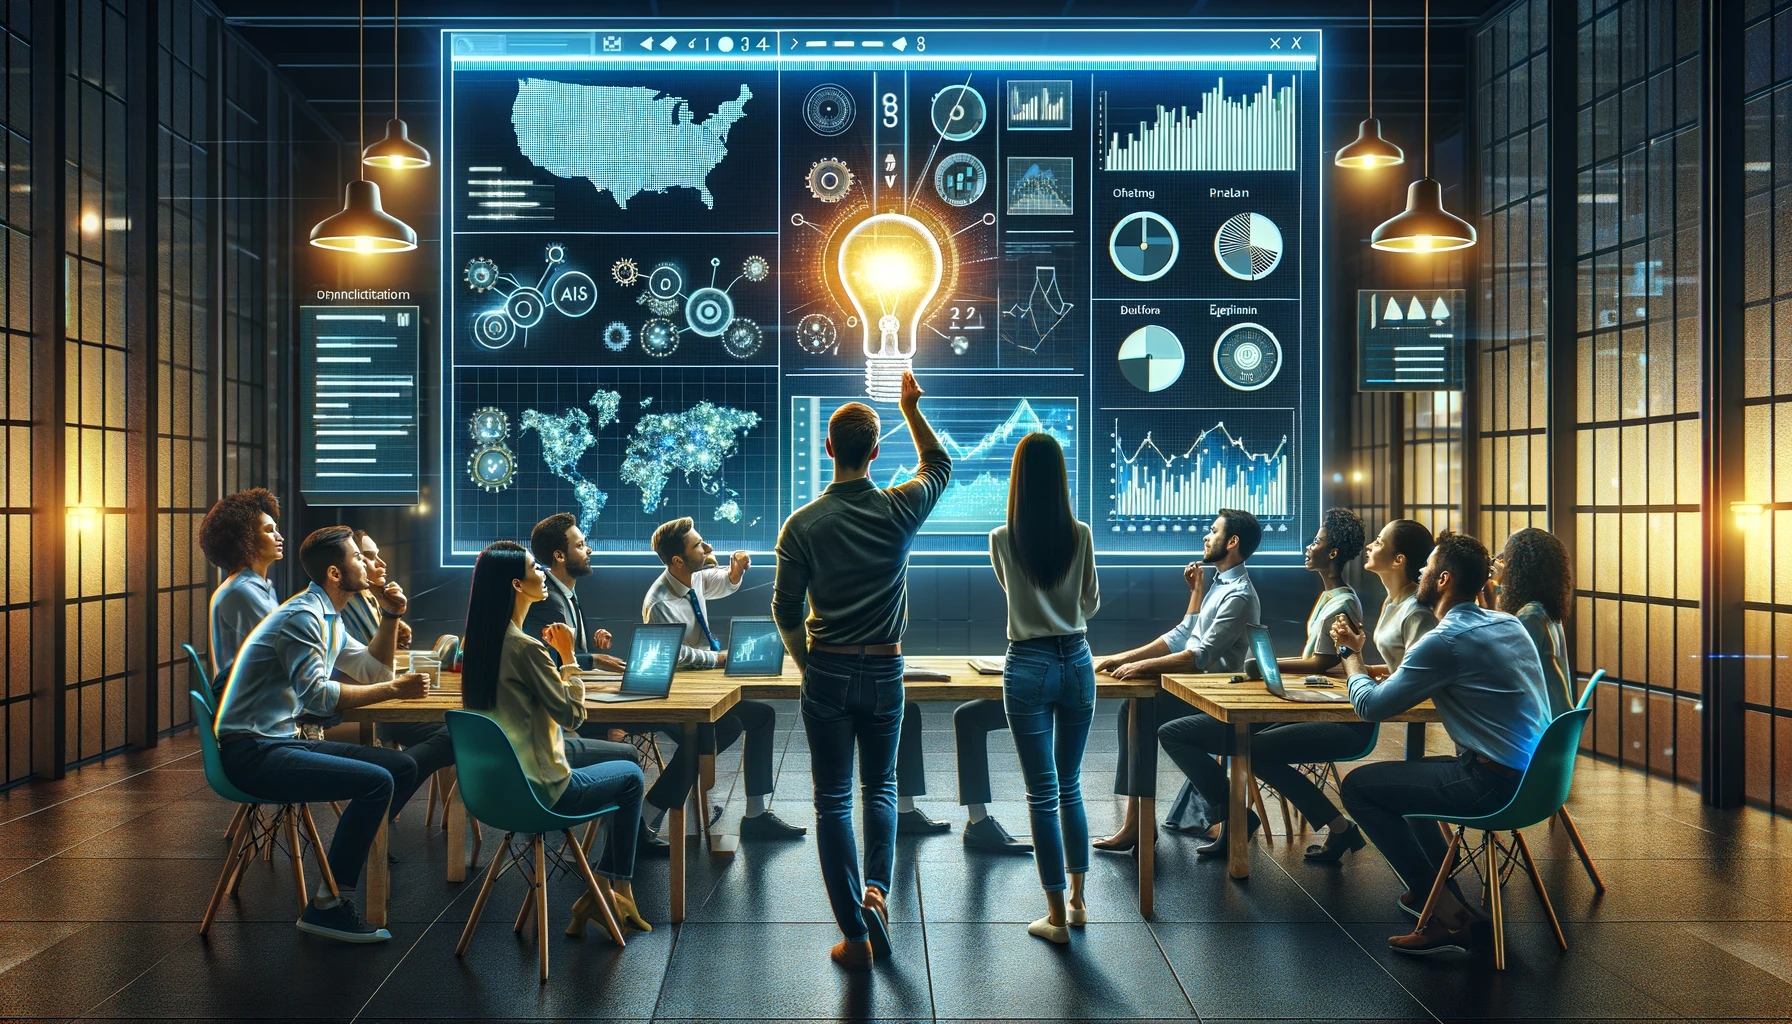 People looking at a data dashboard with an idea lightbulb in the middle